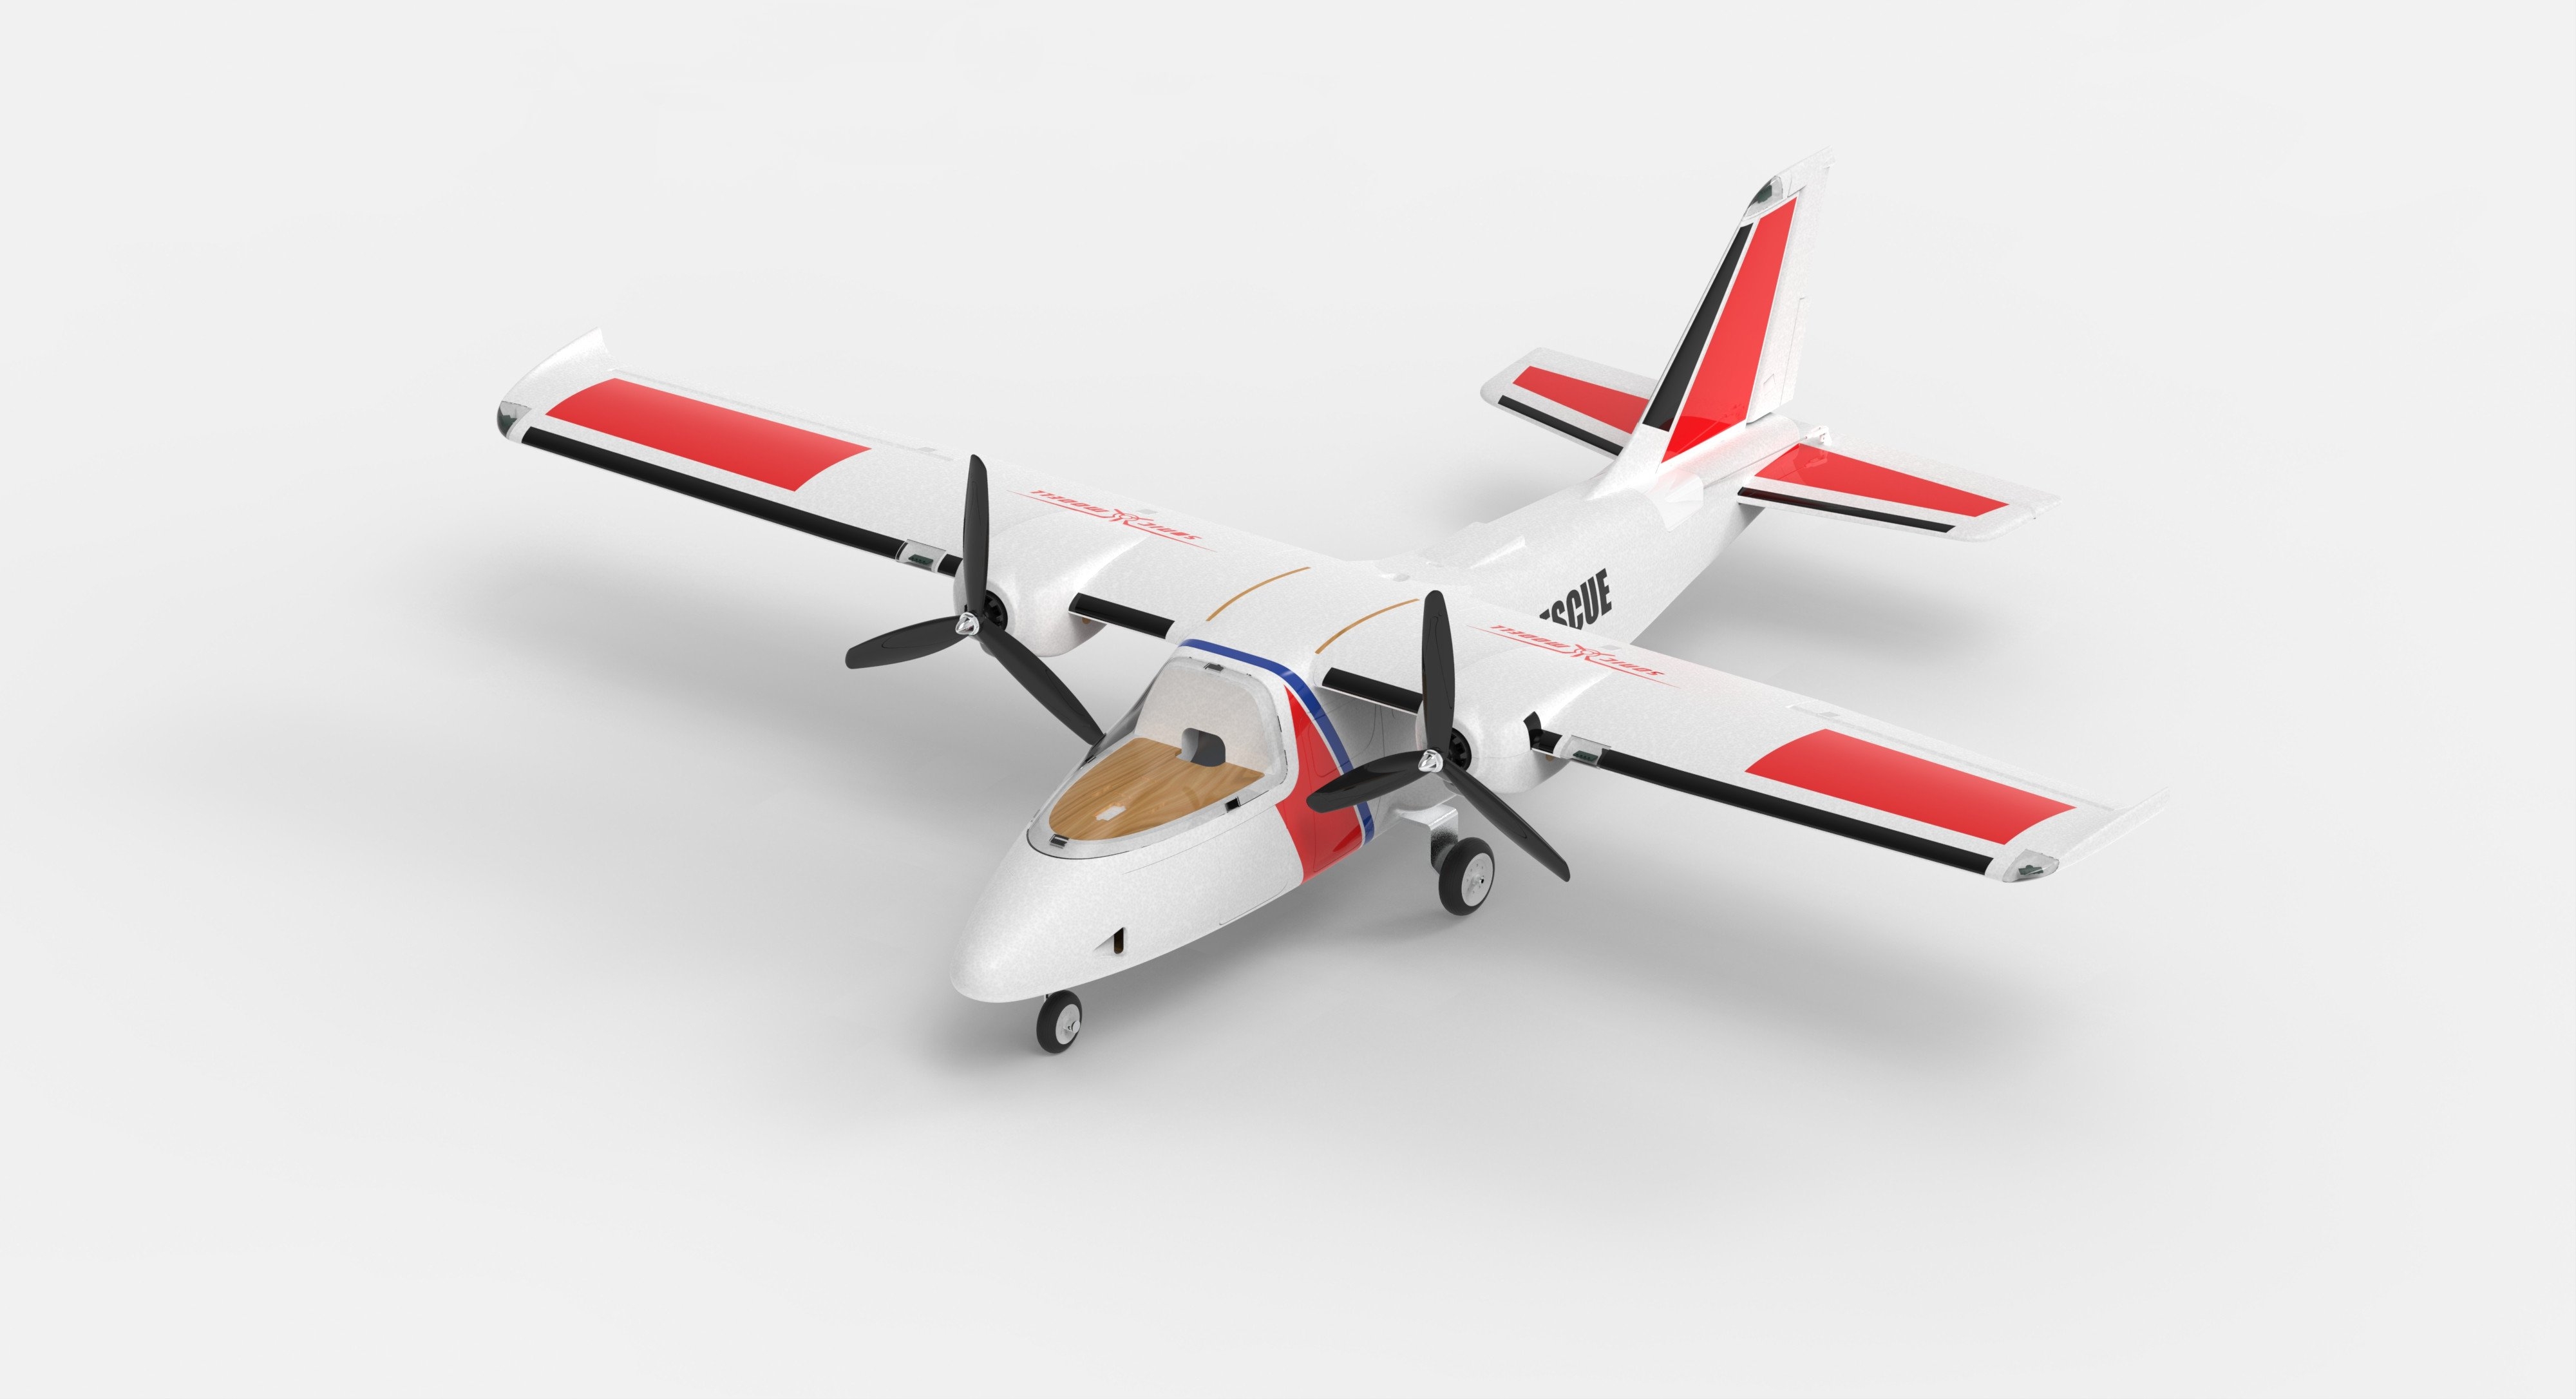 $97.27 for Sonicmodell Binary 1200mm RC Airplane (only for UK warehouse)